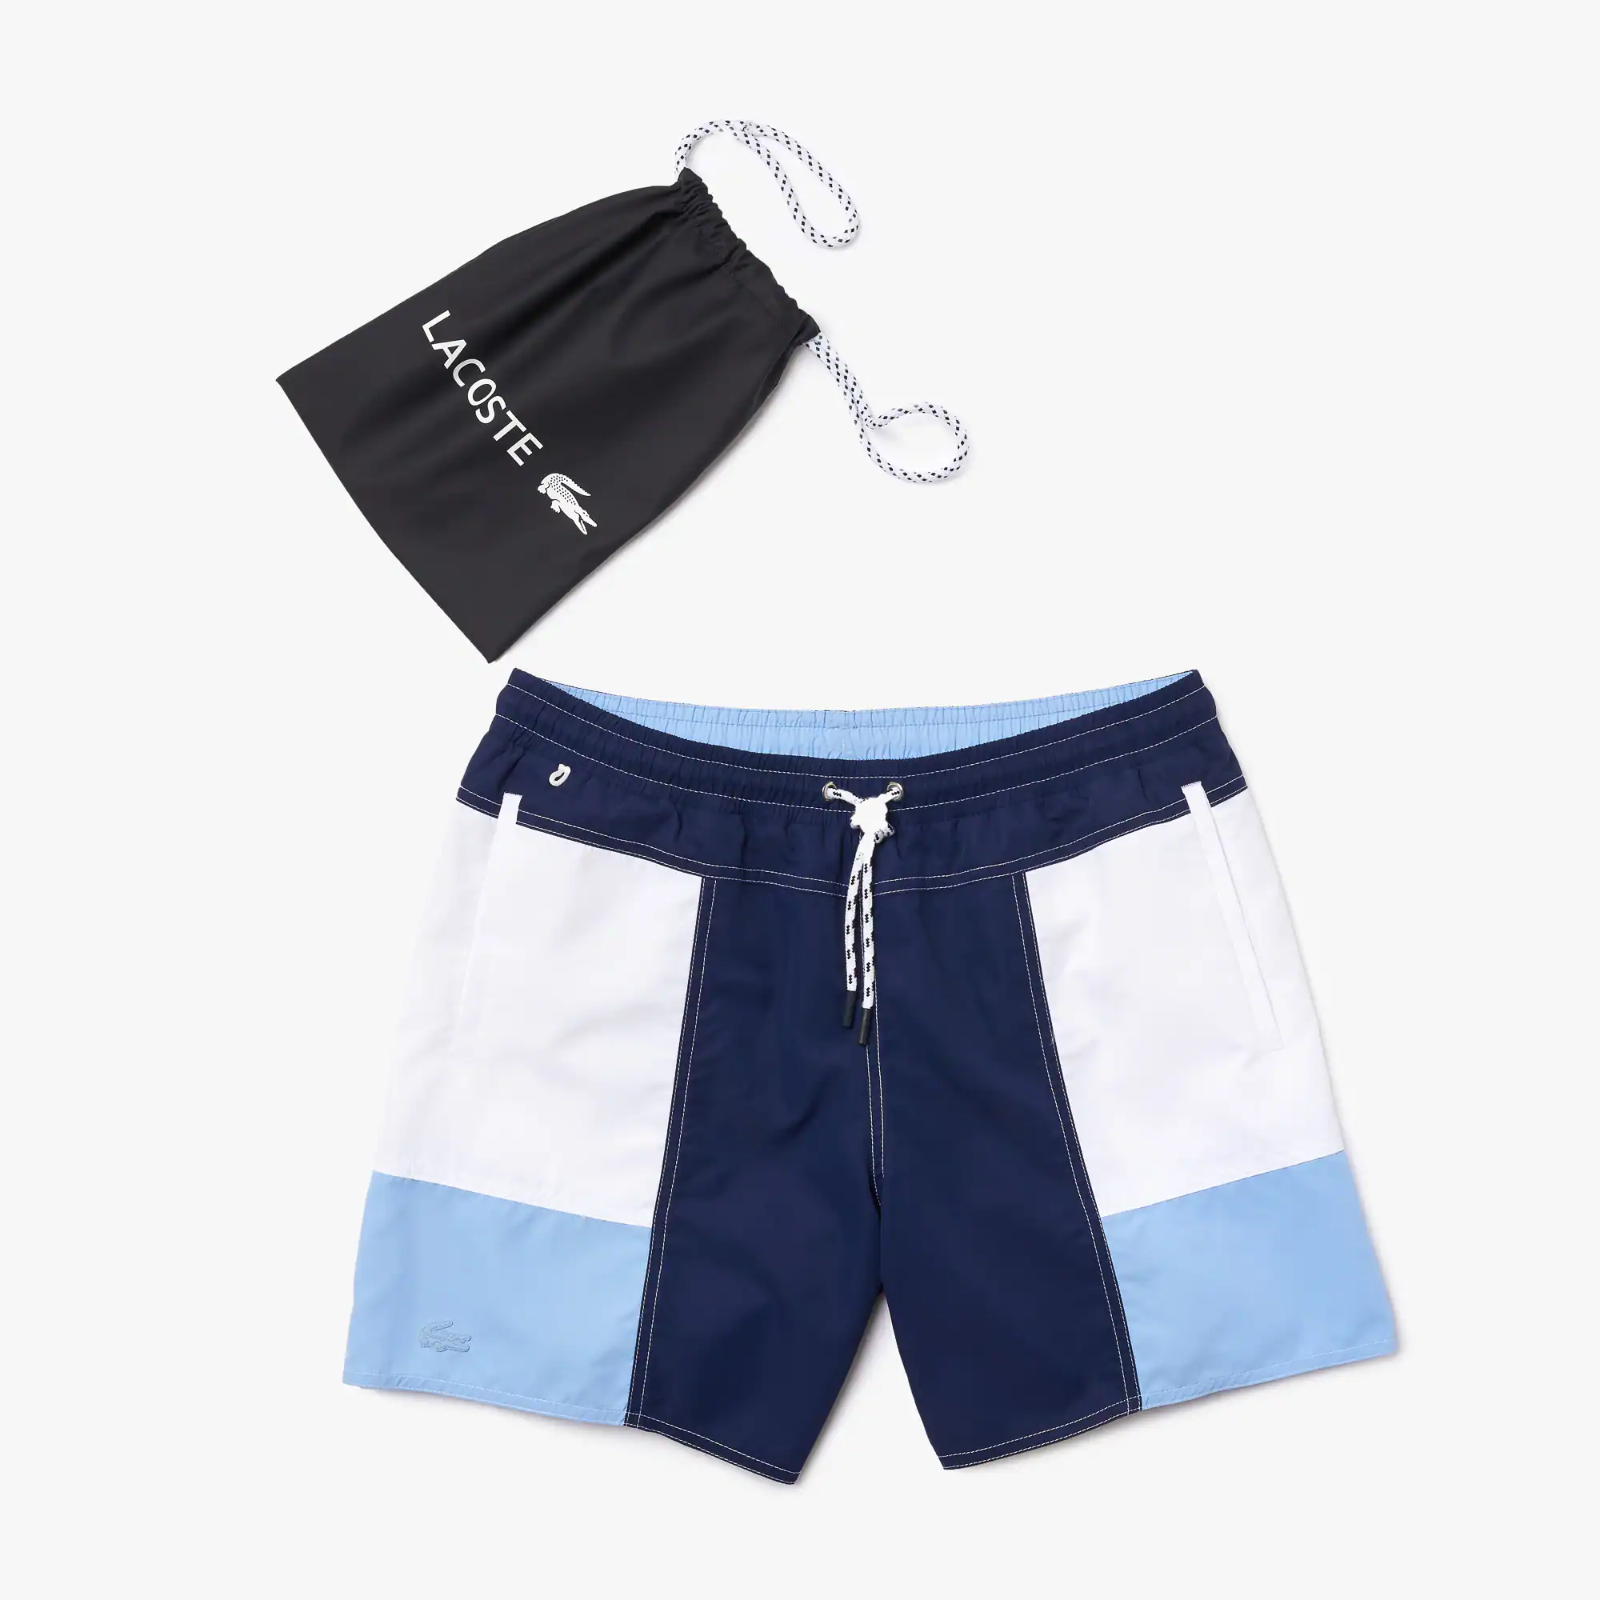 Men’s Colorblock Recycled Cloth Long Swimming Trunks MH9400-51